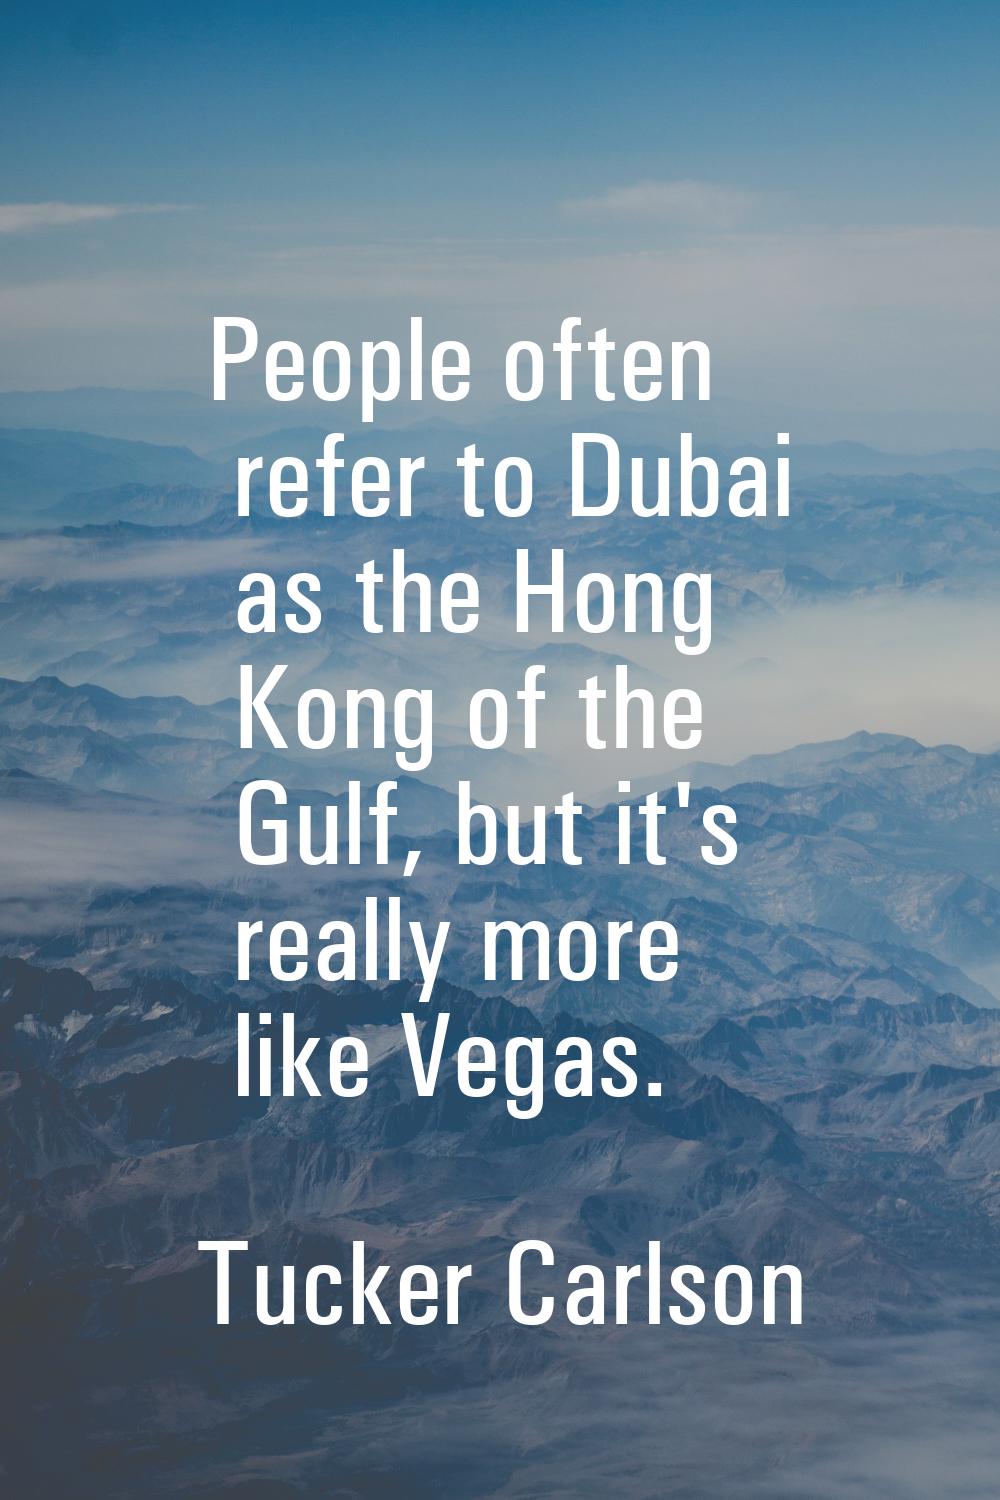 People often refer to Dubai as the Hong Kong of the Gulf, but it's really more like Vegas.